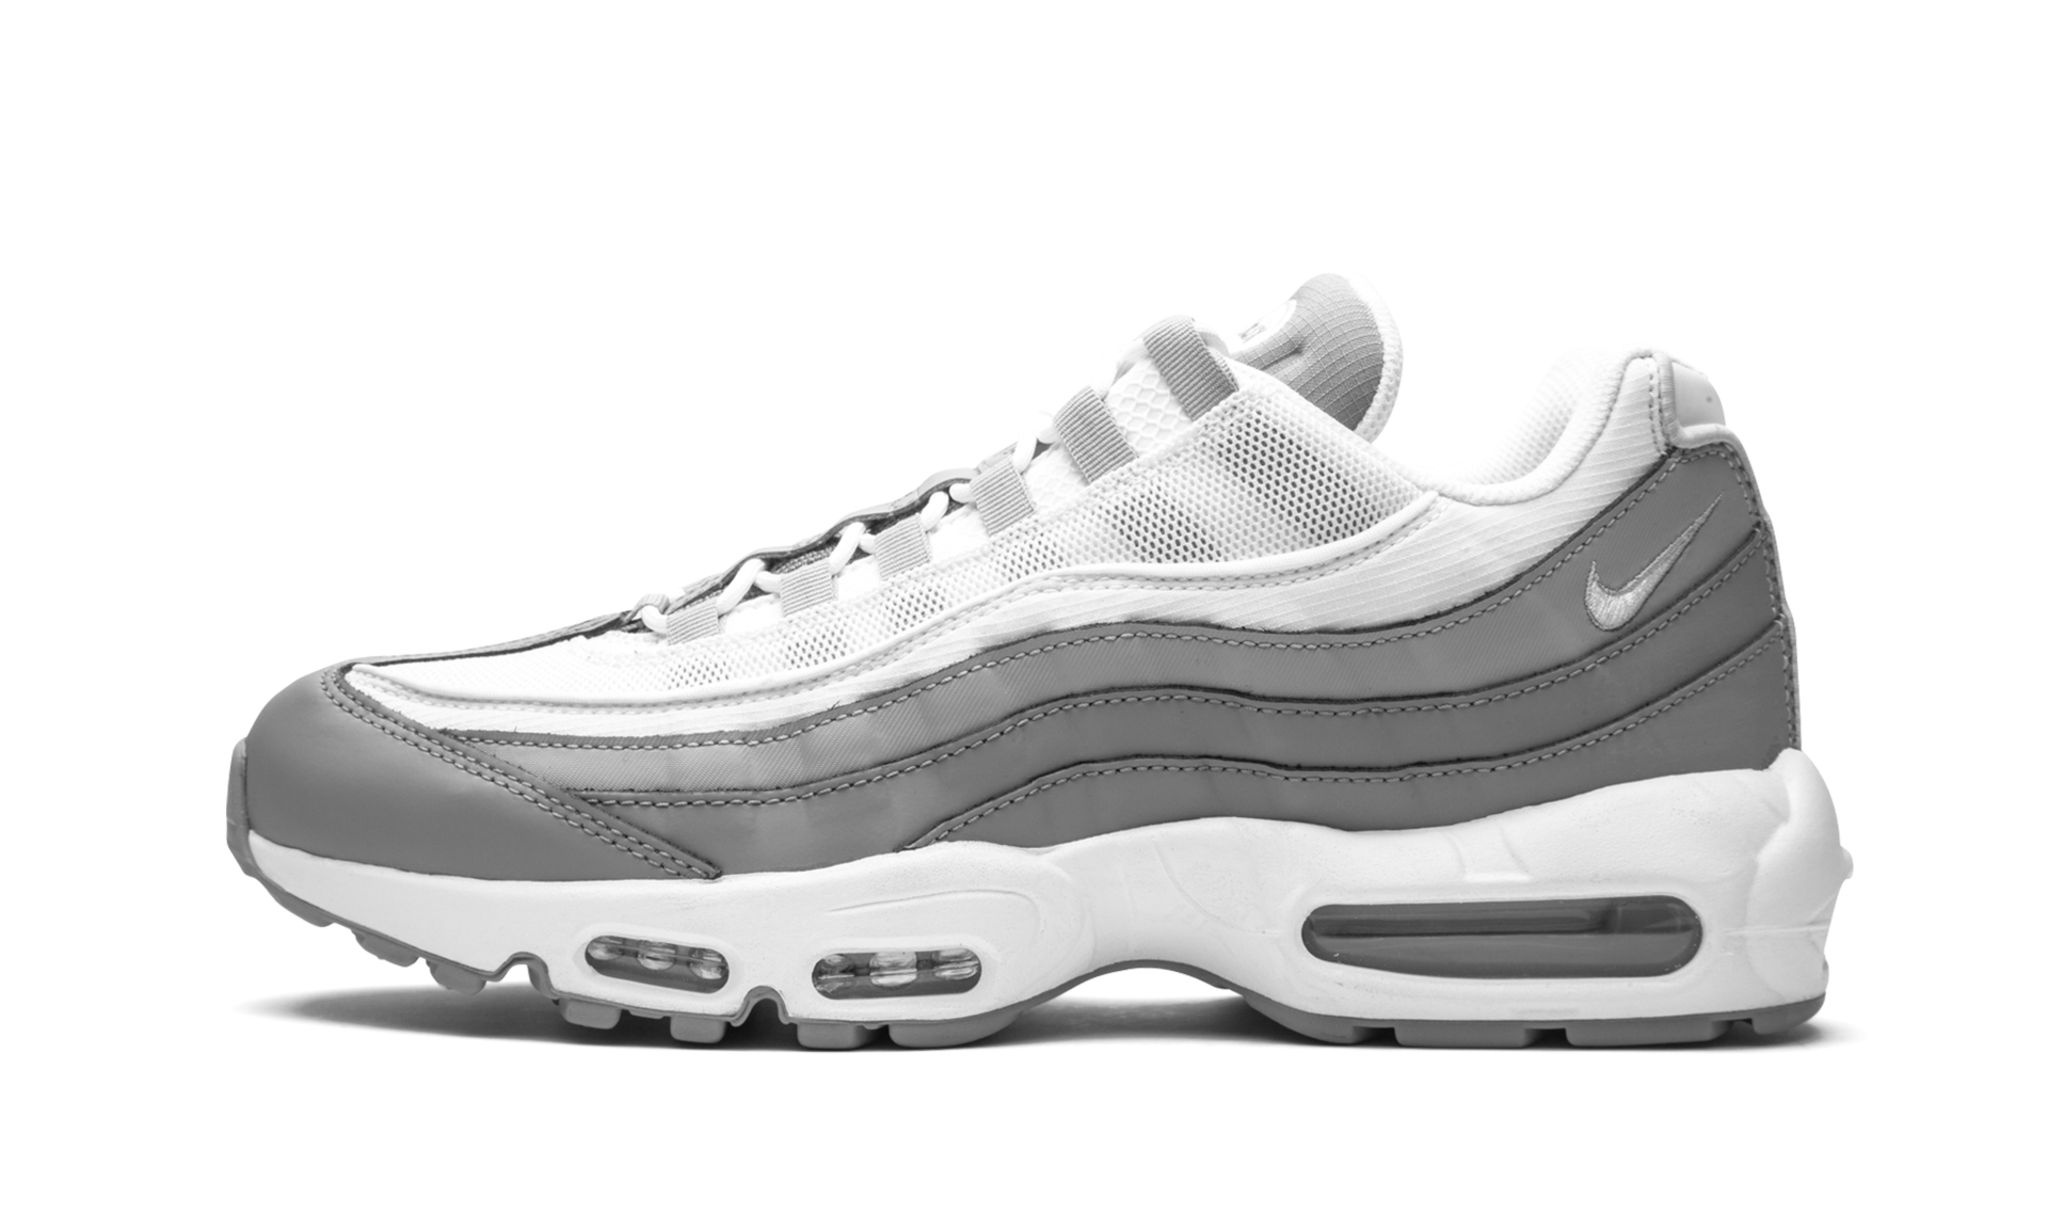 Air Max 95 Essential "Particle Grey" - 1